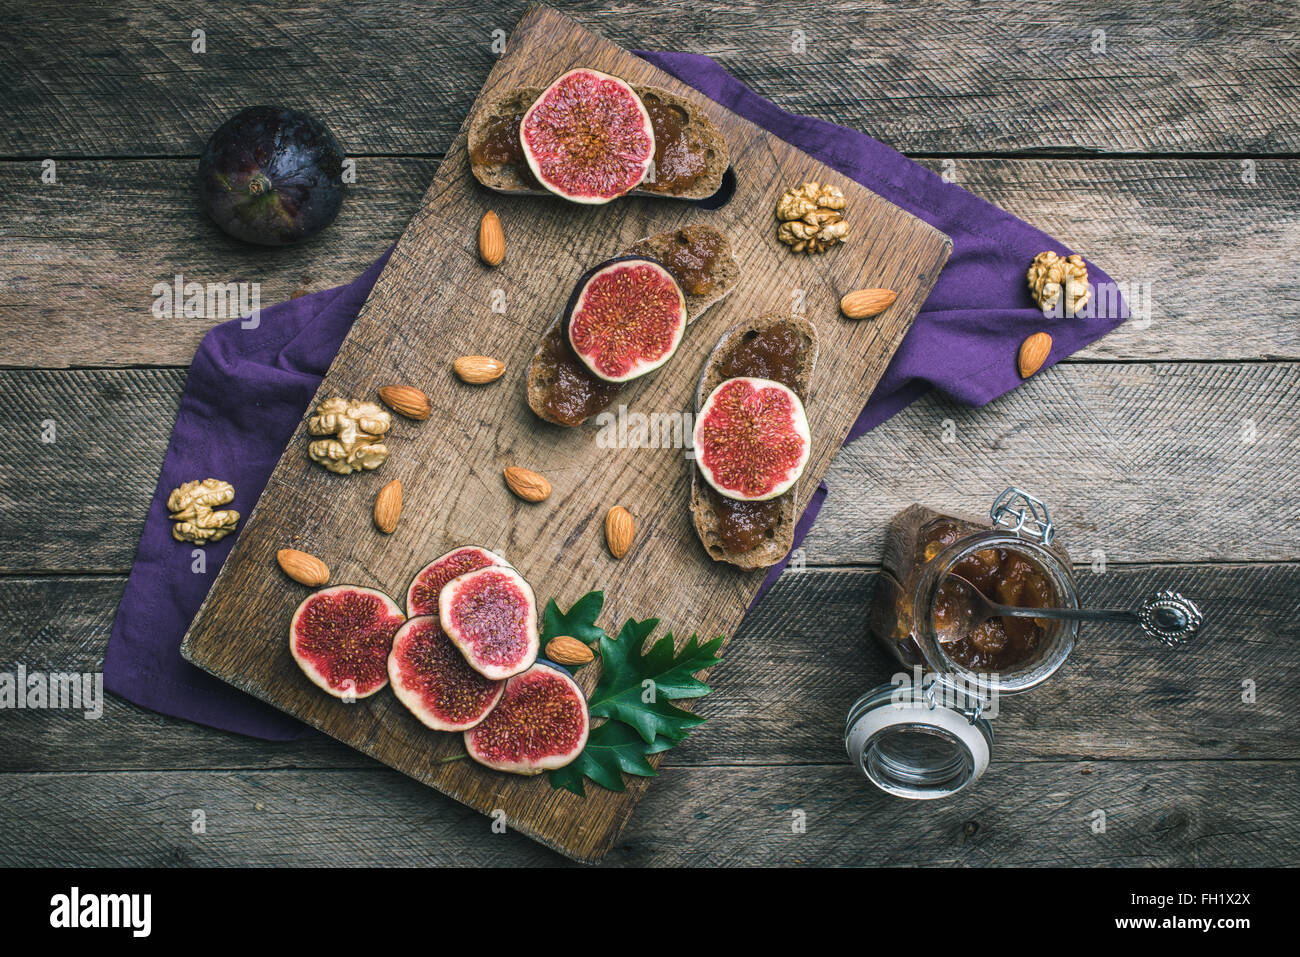 figs, nuts and bread with jam on choppingboard in rustic style. Autumn season food photo Stock Photo